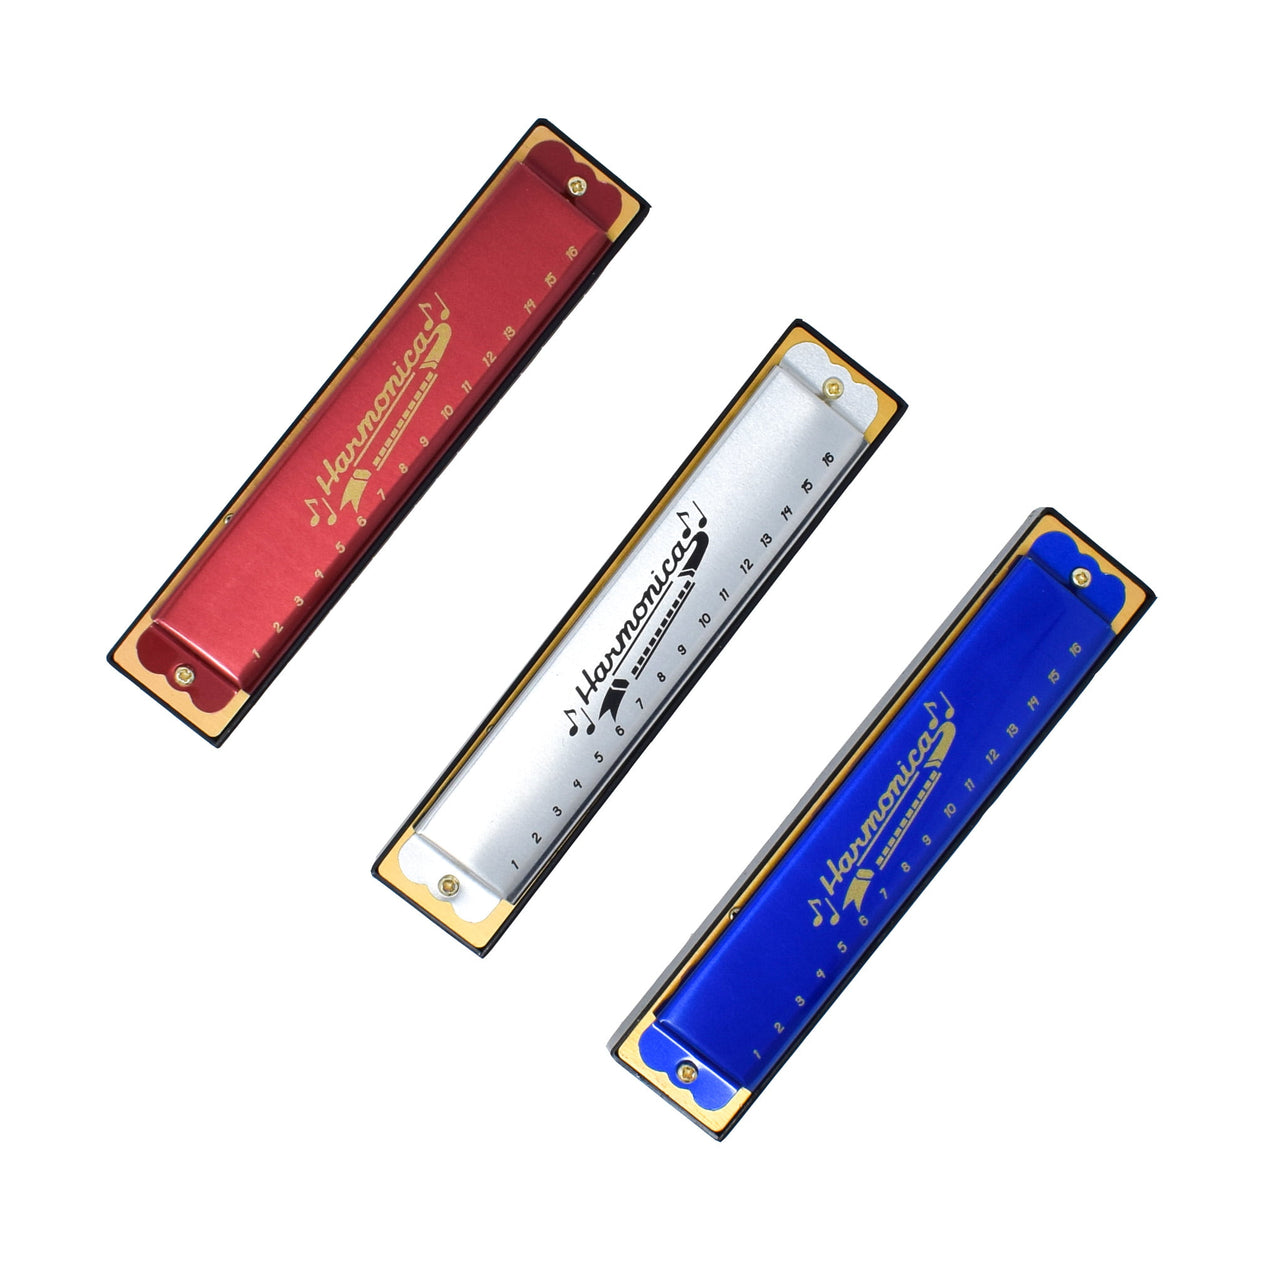 Musical Instrument Aluminum Tremolo Harmonica Toy for Kids